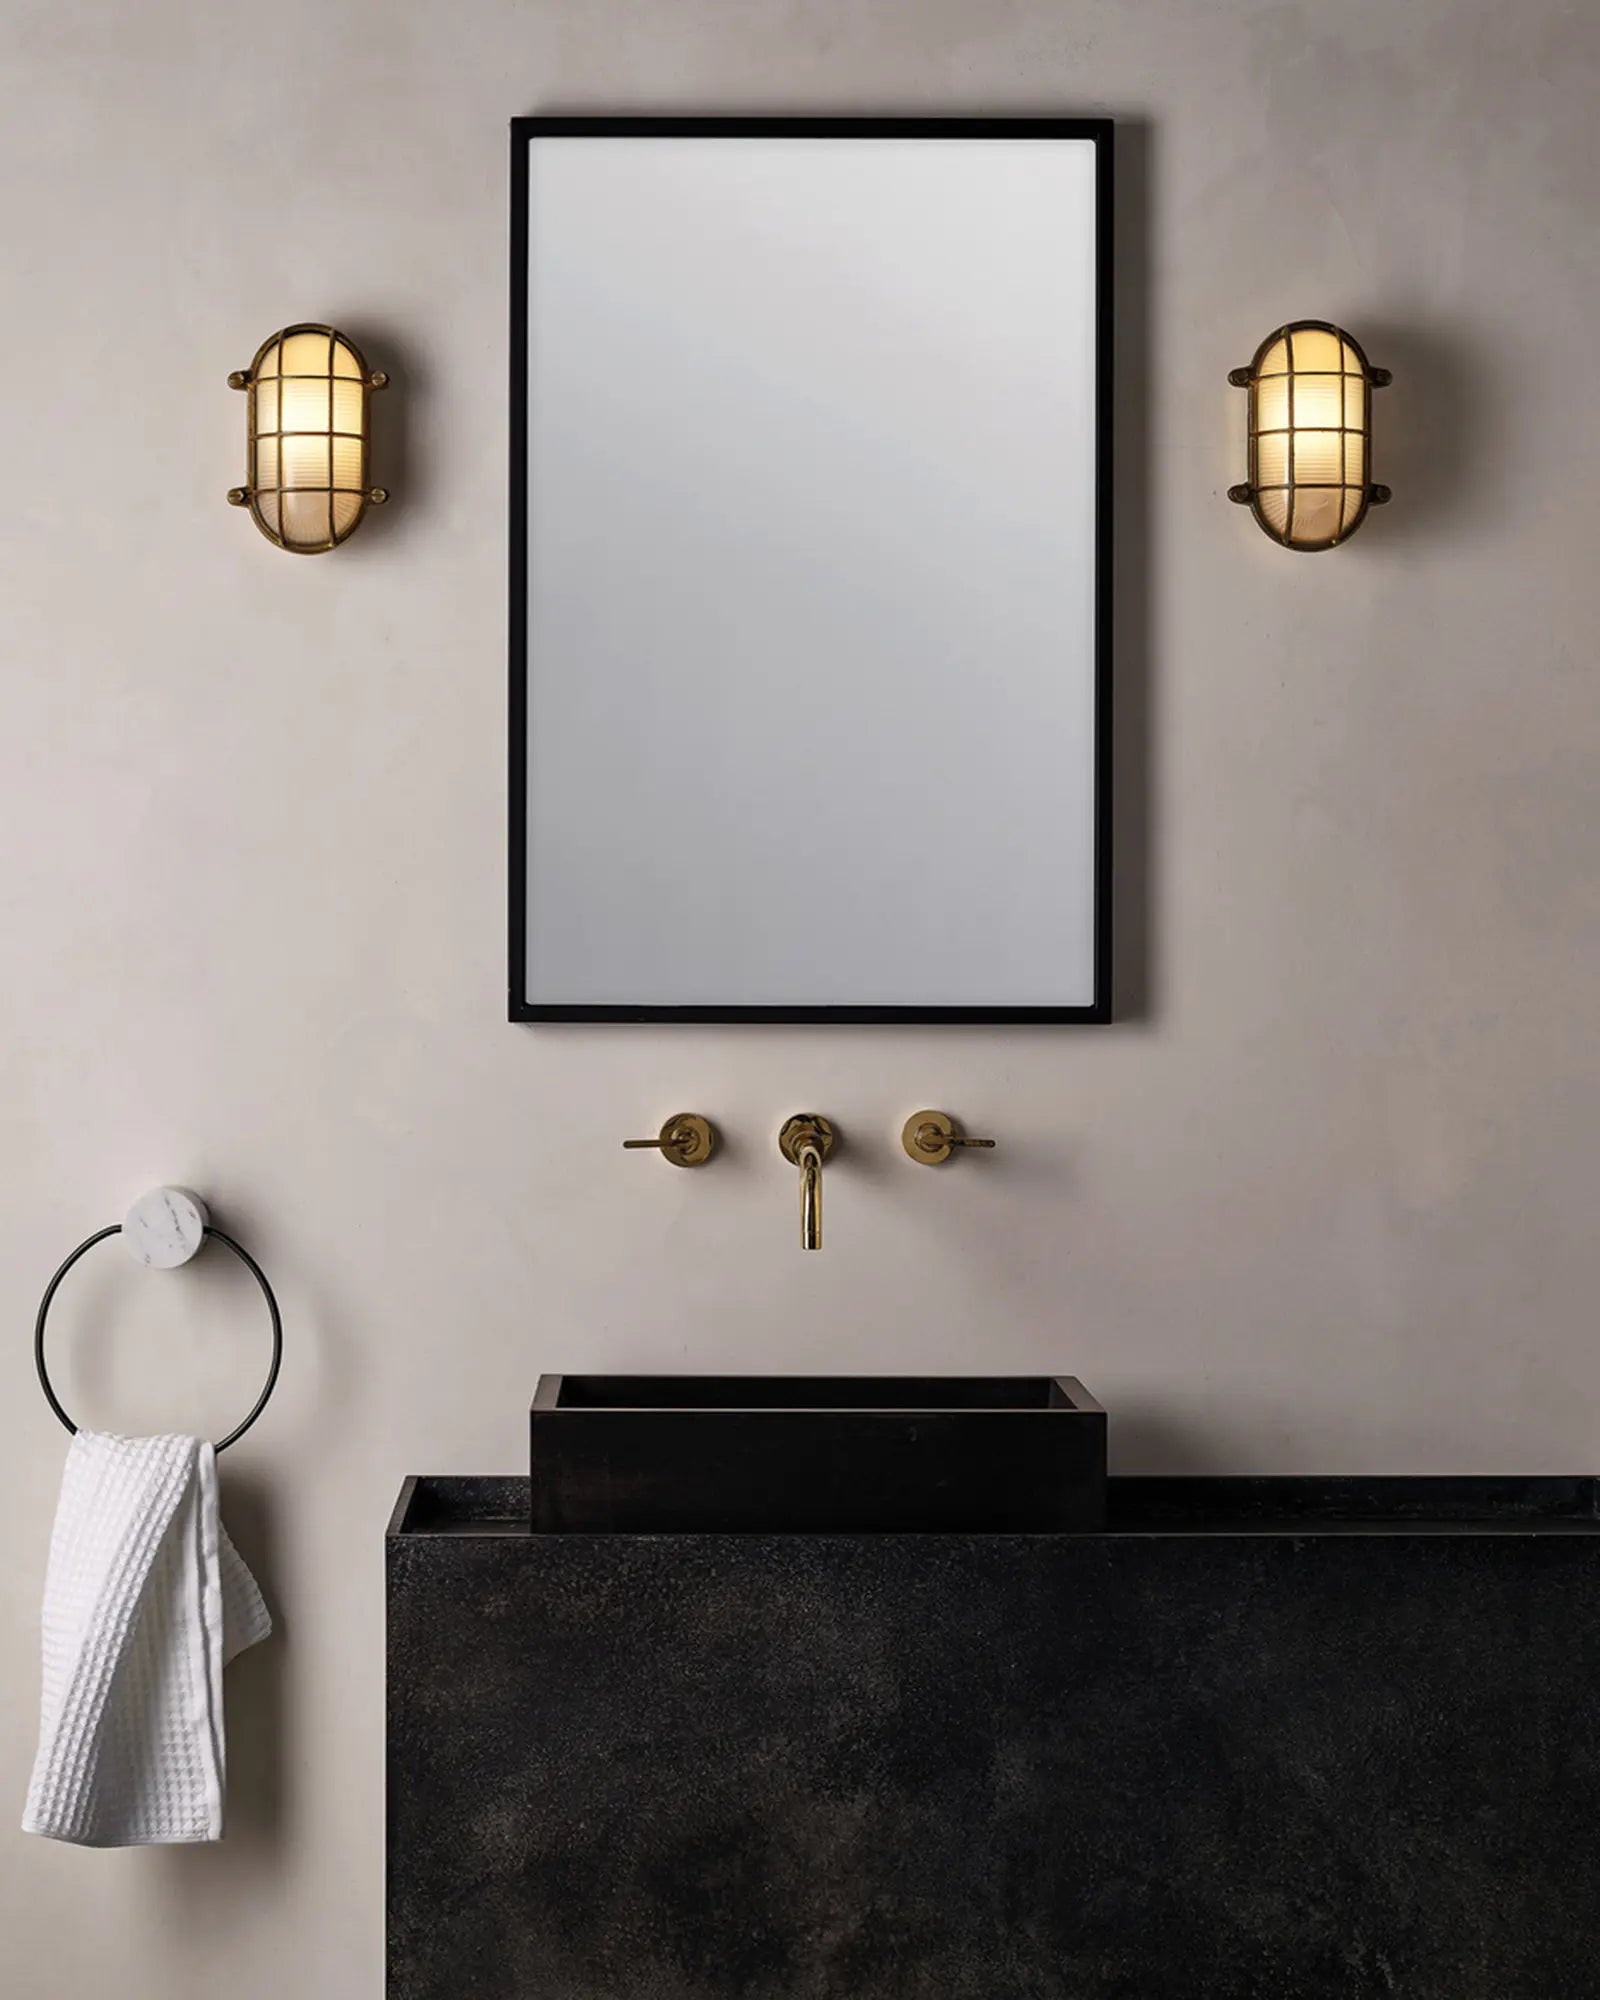 Thurso oval brass and glass classic wall light on the mirror's sides in a bathroom